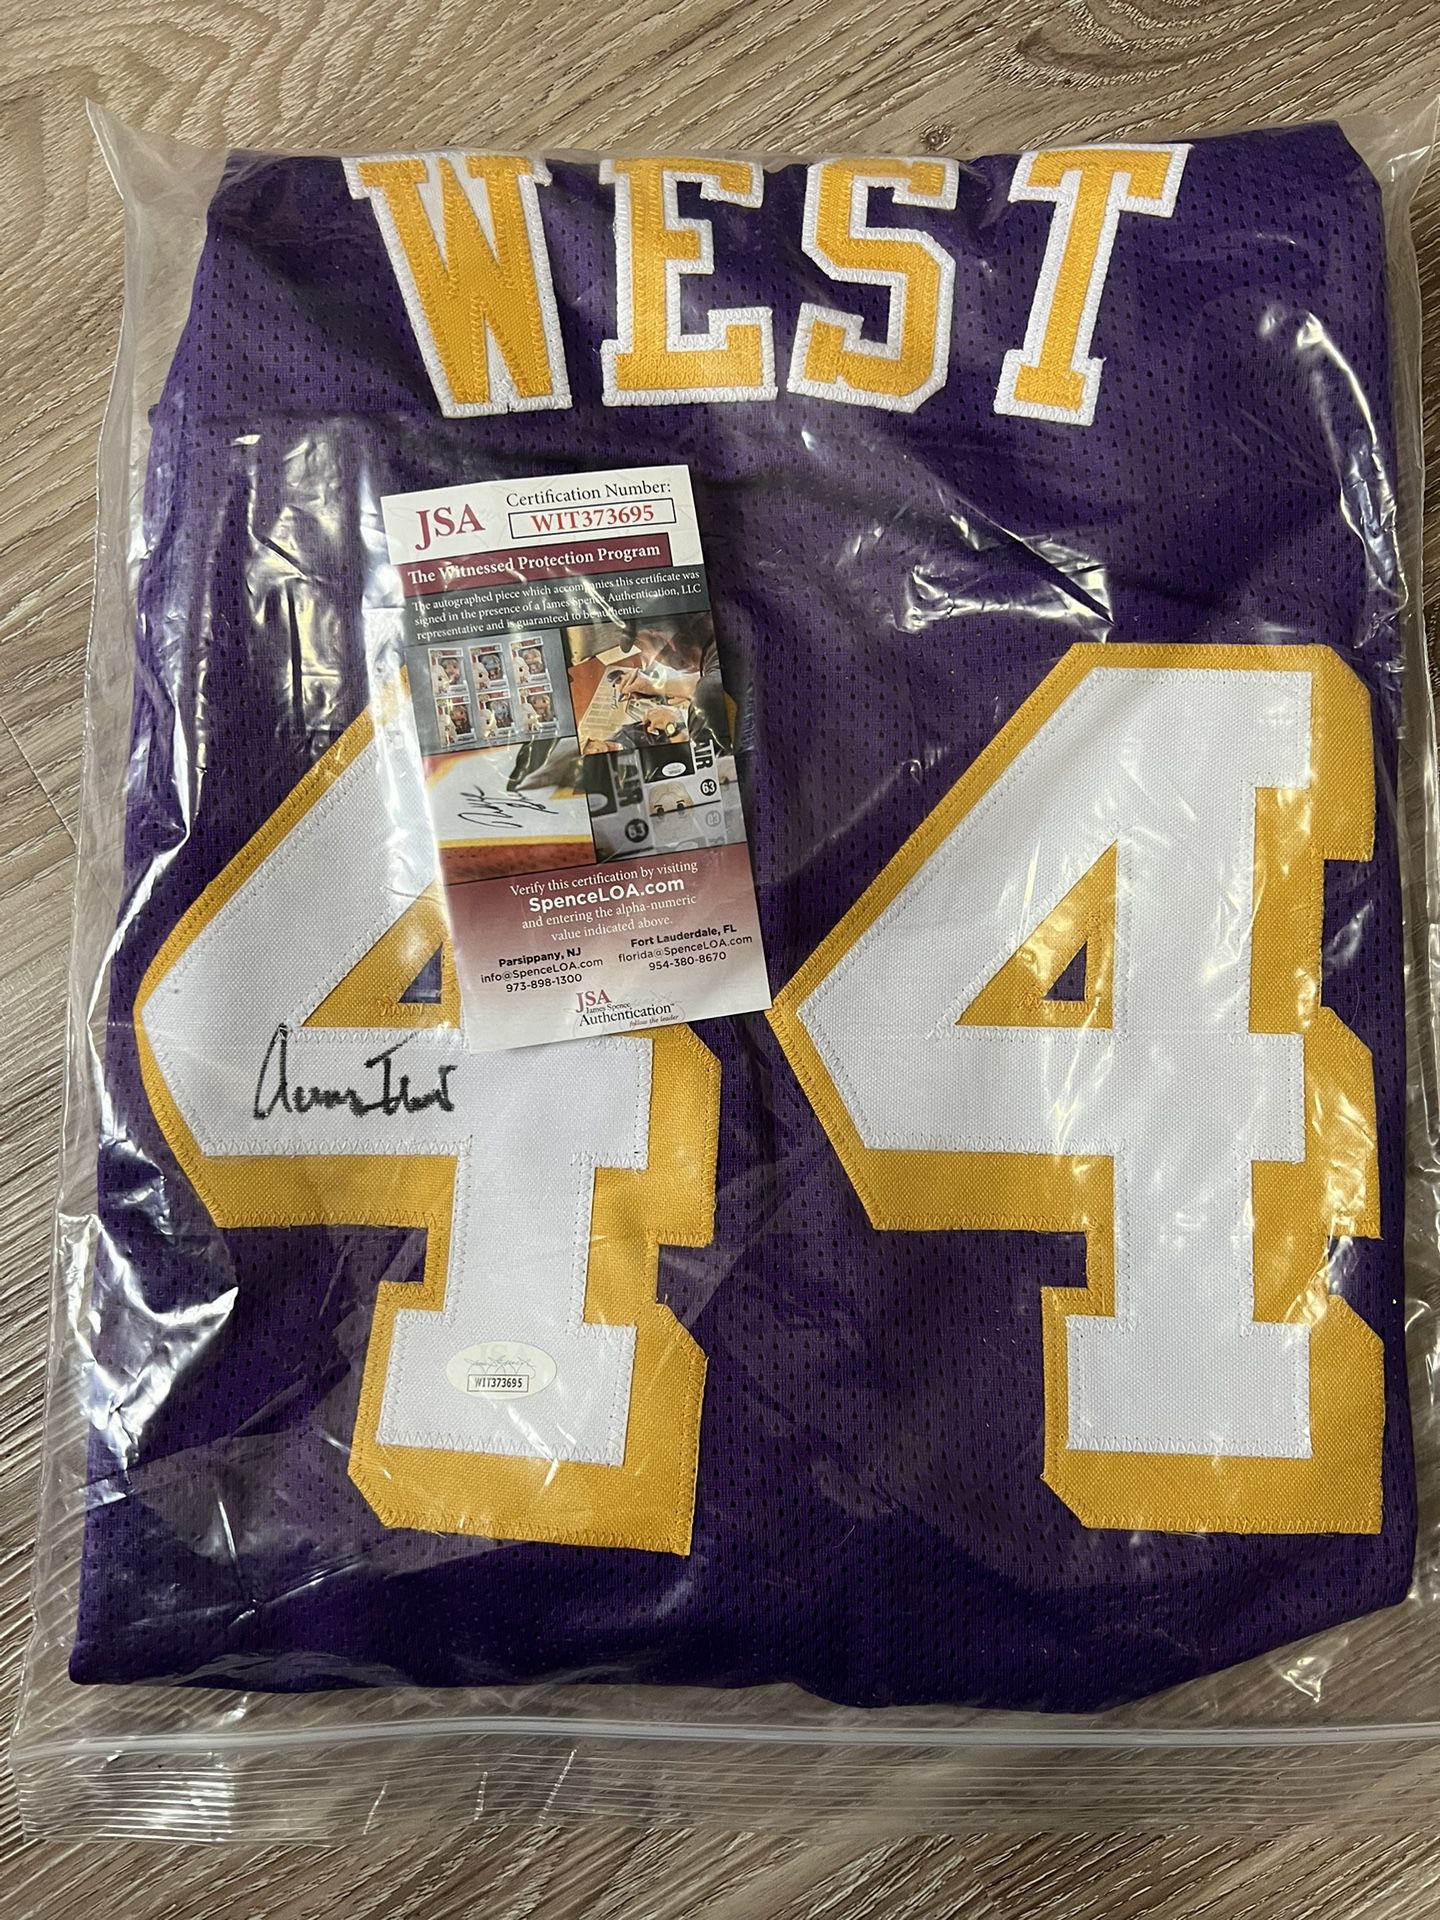 Jerry West Authentic Signed Purple Lakers Jersey 